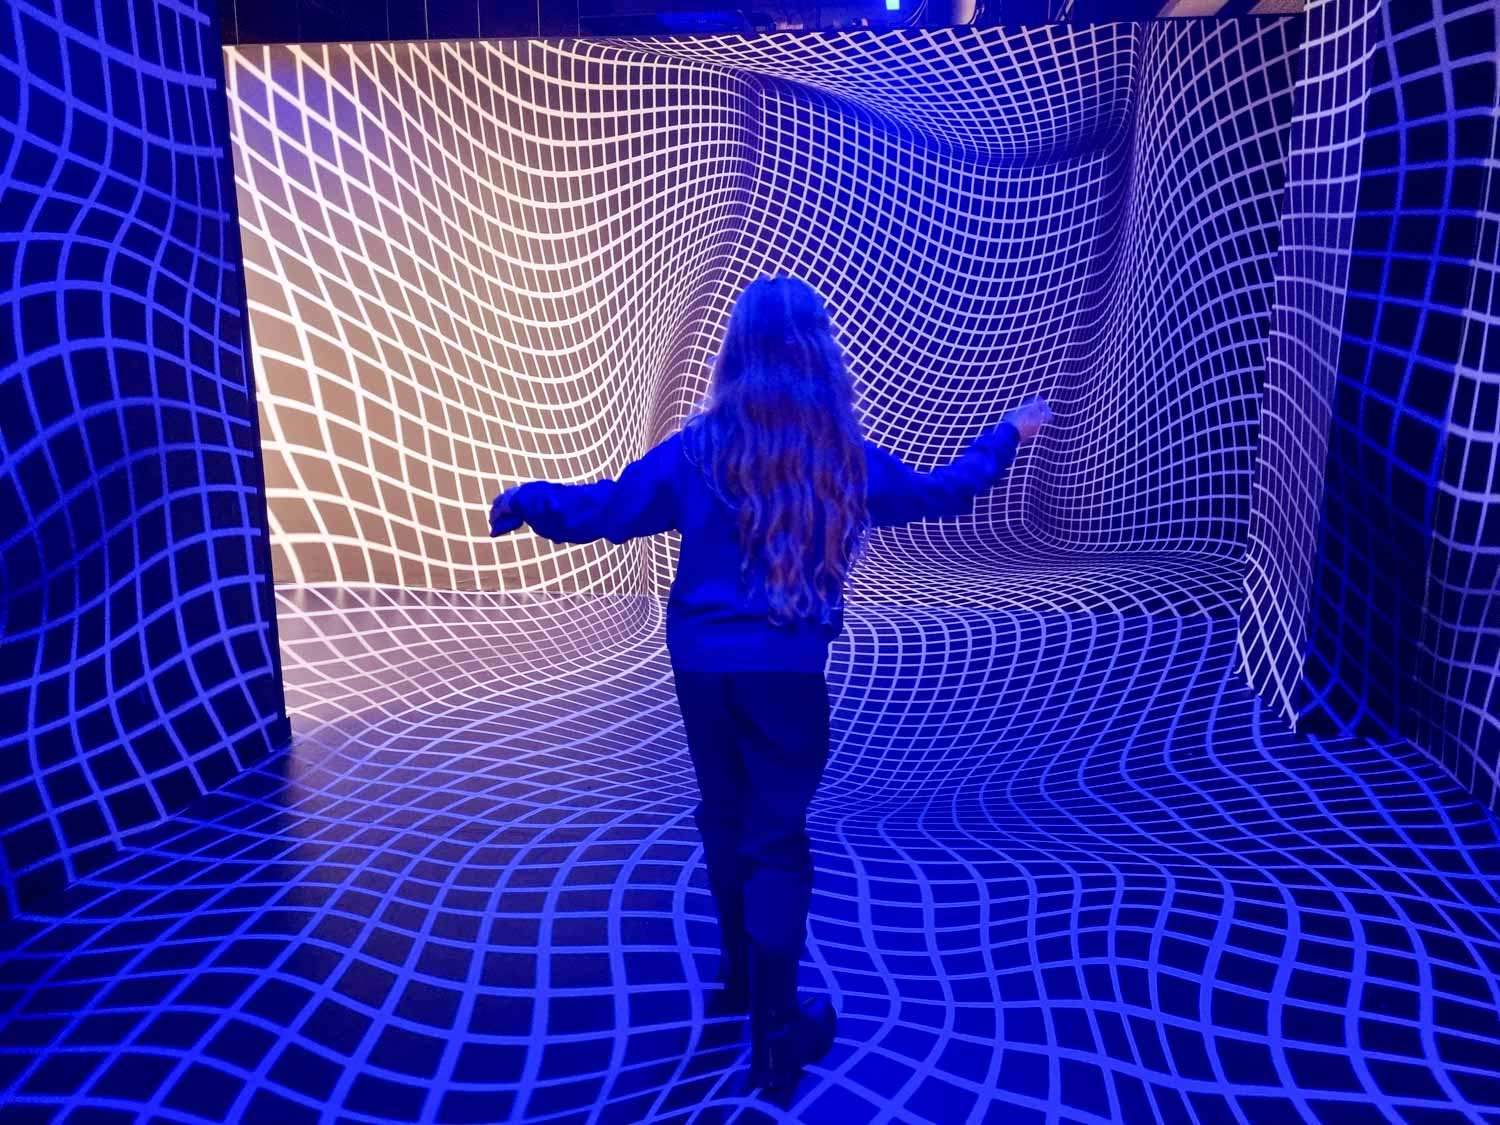 My daughter inside a room with apparently warped floors and walls at the London Museum of Illusions - visiting Twist Museum with kids